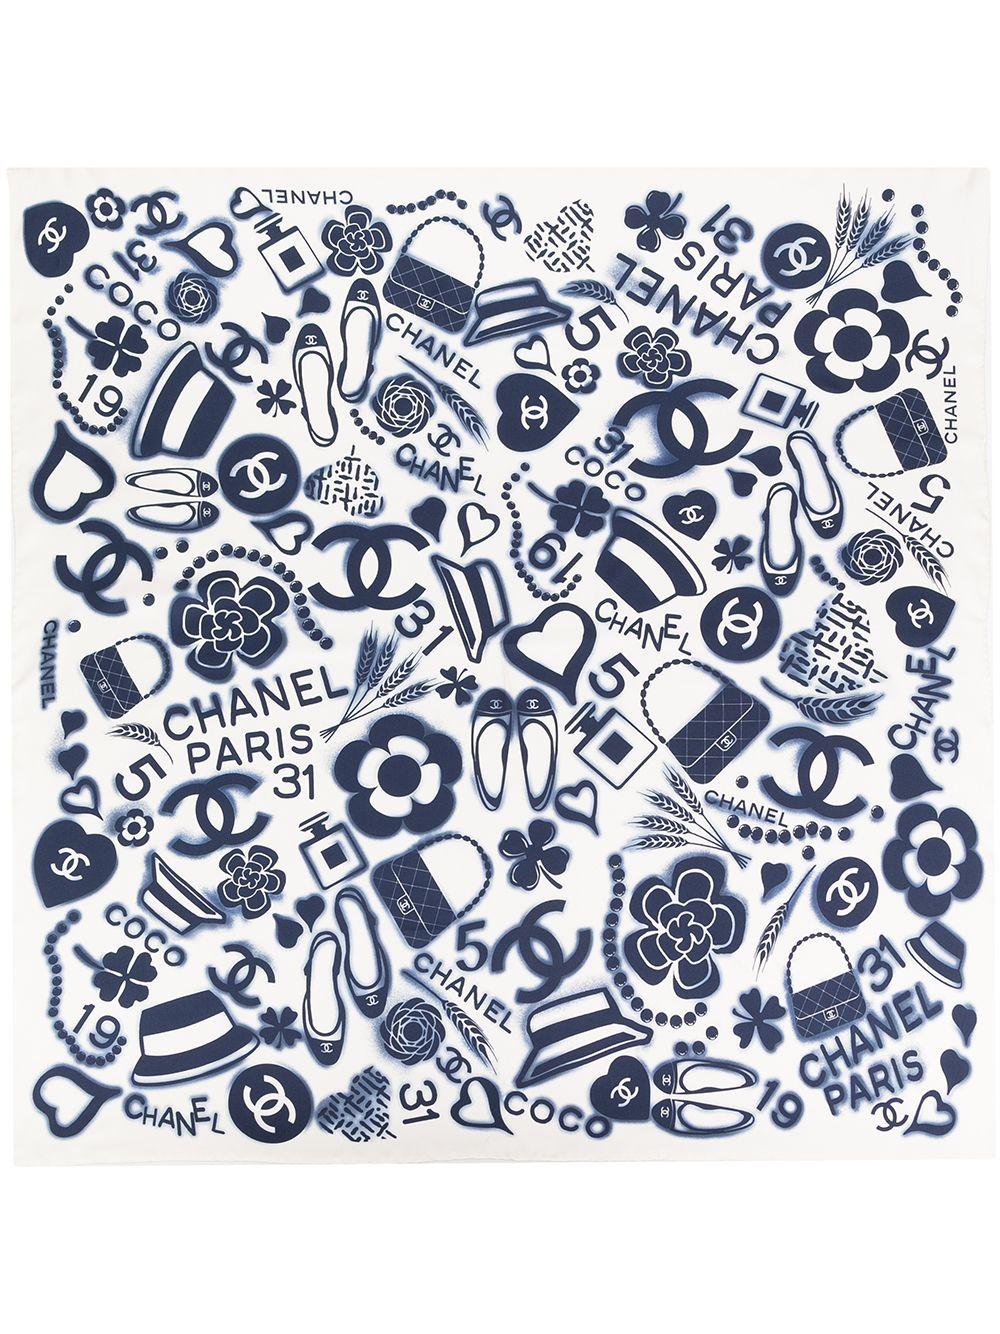 Adorned in four-leaf clovers, pearls, camellias and much more this 100% silk scarf is made for all the Chanel enthusiasts out there. Measures 90cm x 90cm.

Colour: White & Navy print

Composition: 100% Silk

Condition: Excellent condition

This